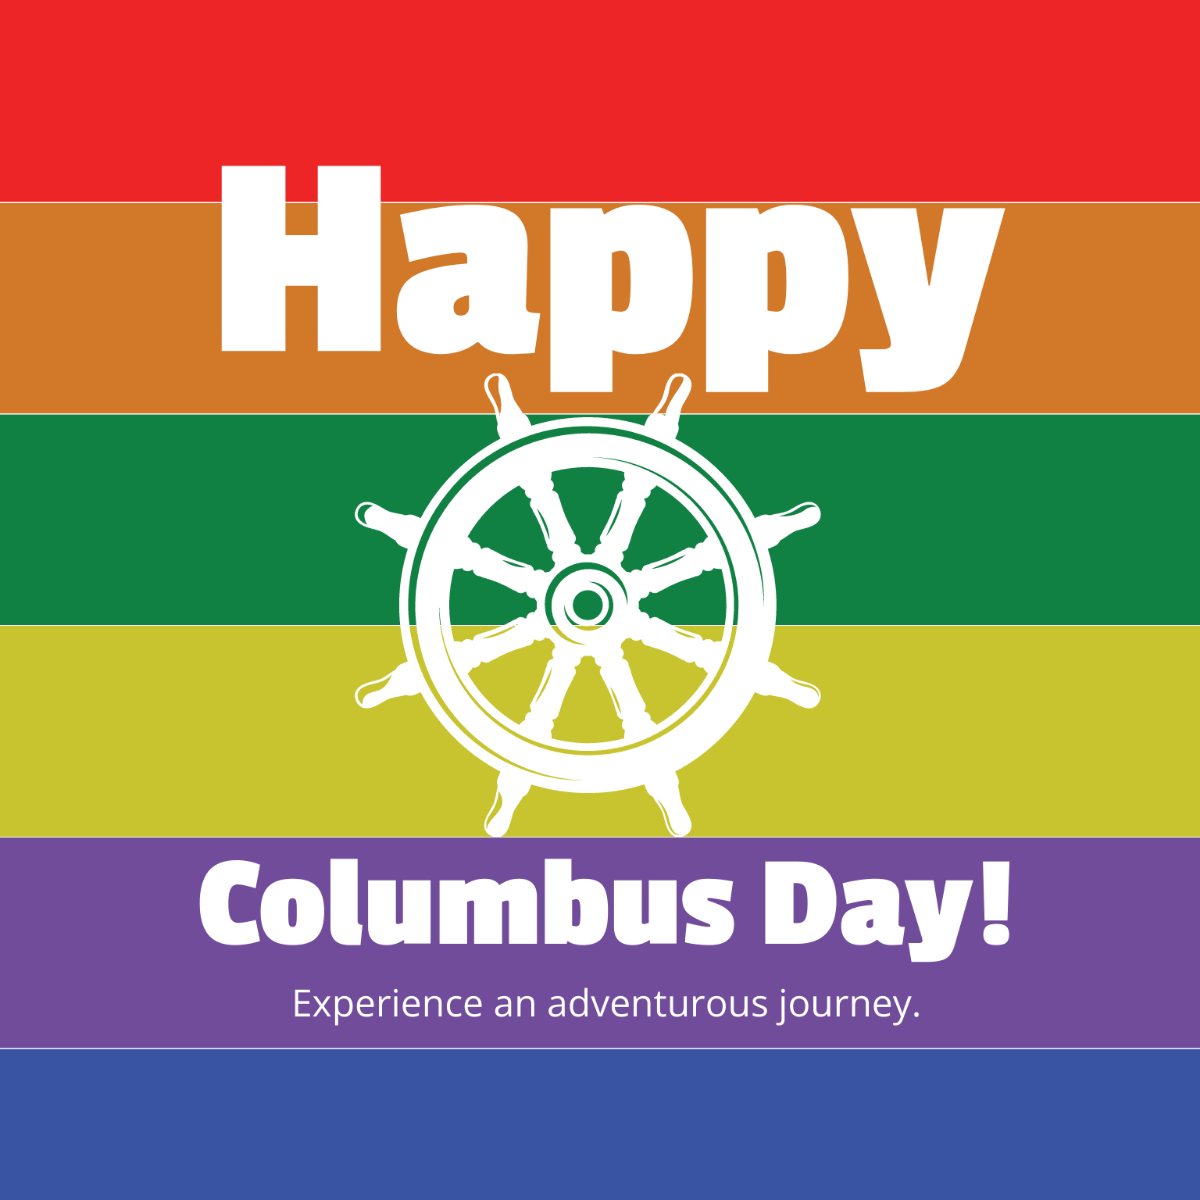 Columbus Day Greeting Card Vector Template